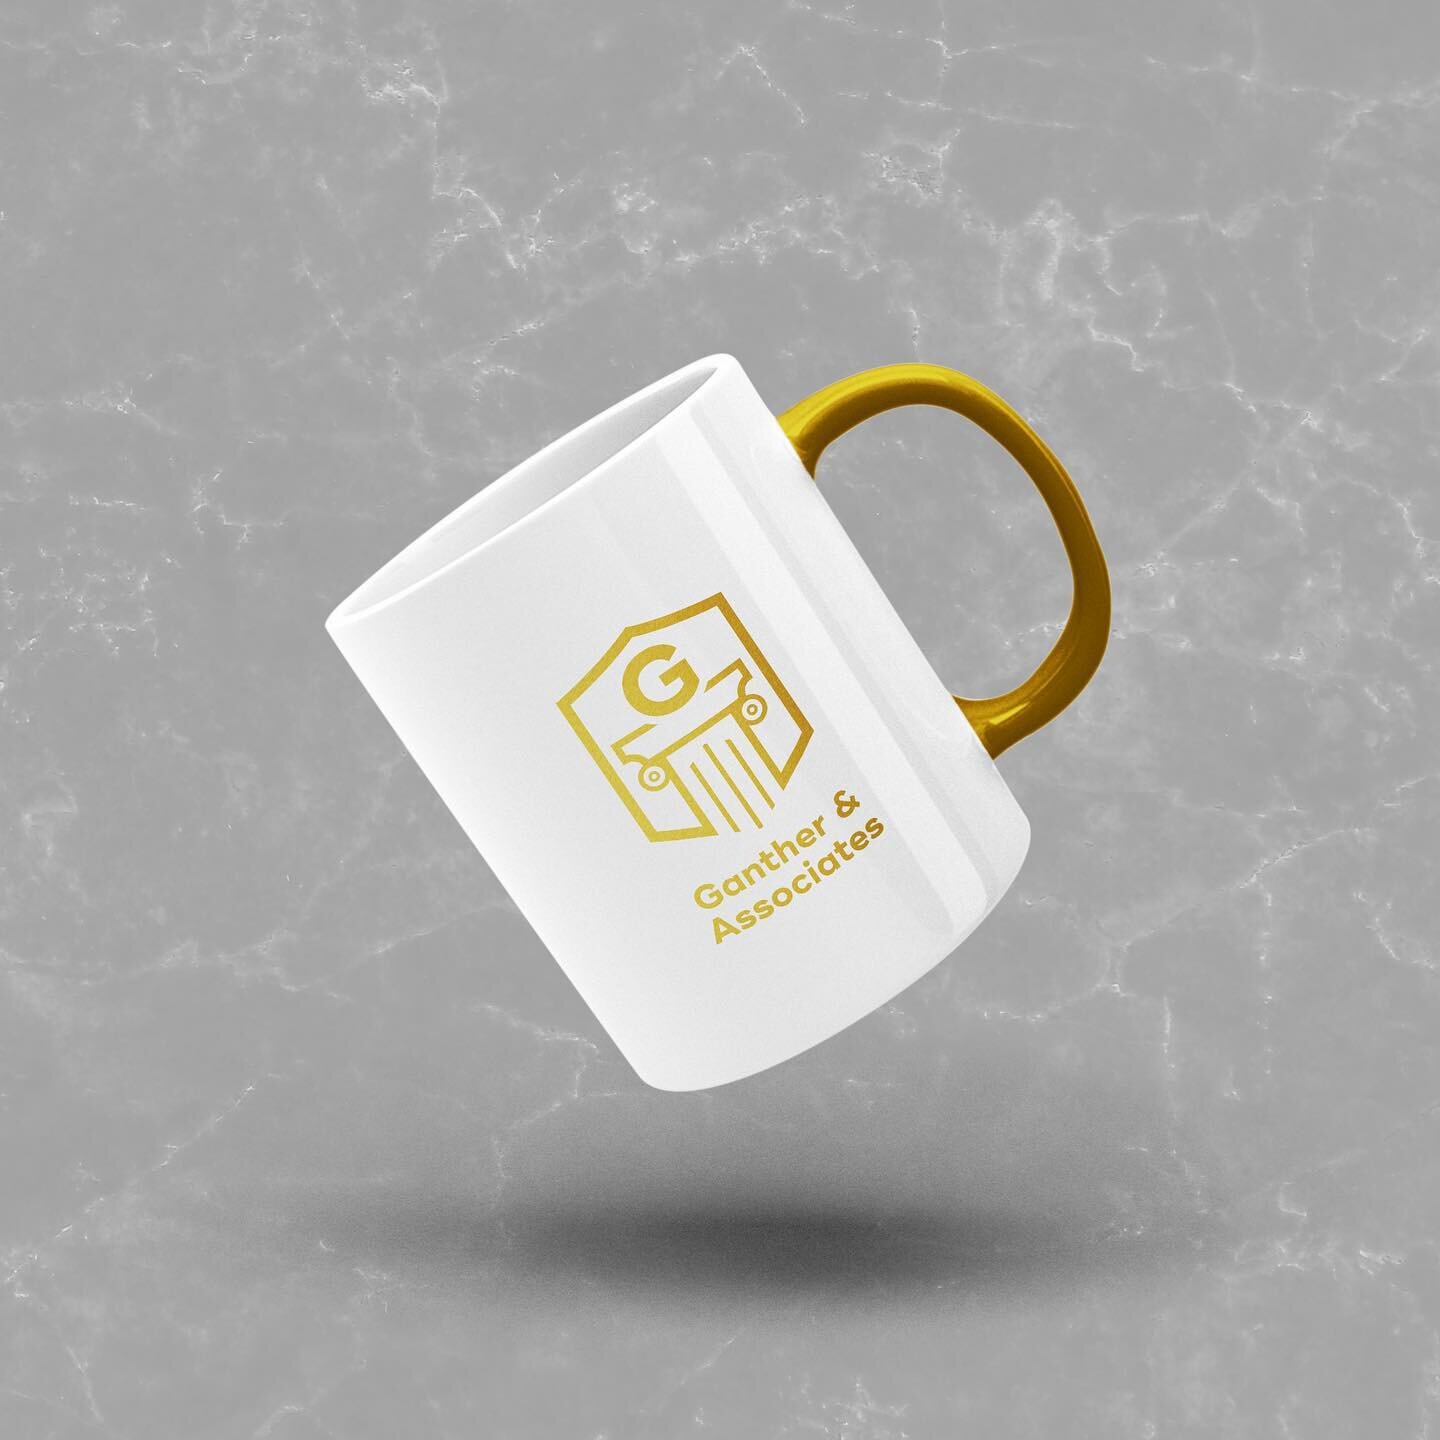 Coffee is best served out of cups at Ganther &amp; Associates. Since 1960 Jay and his family have been taking care of families and businesses with their financial needs. 

#logo #logodesign #graphicdesign #mockup #coffee #coffeecup #logos #logoinspir